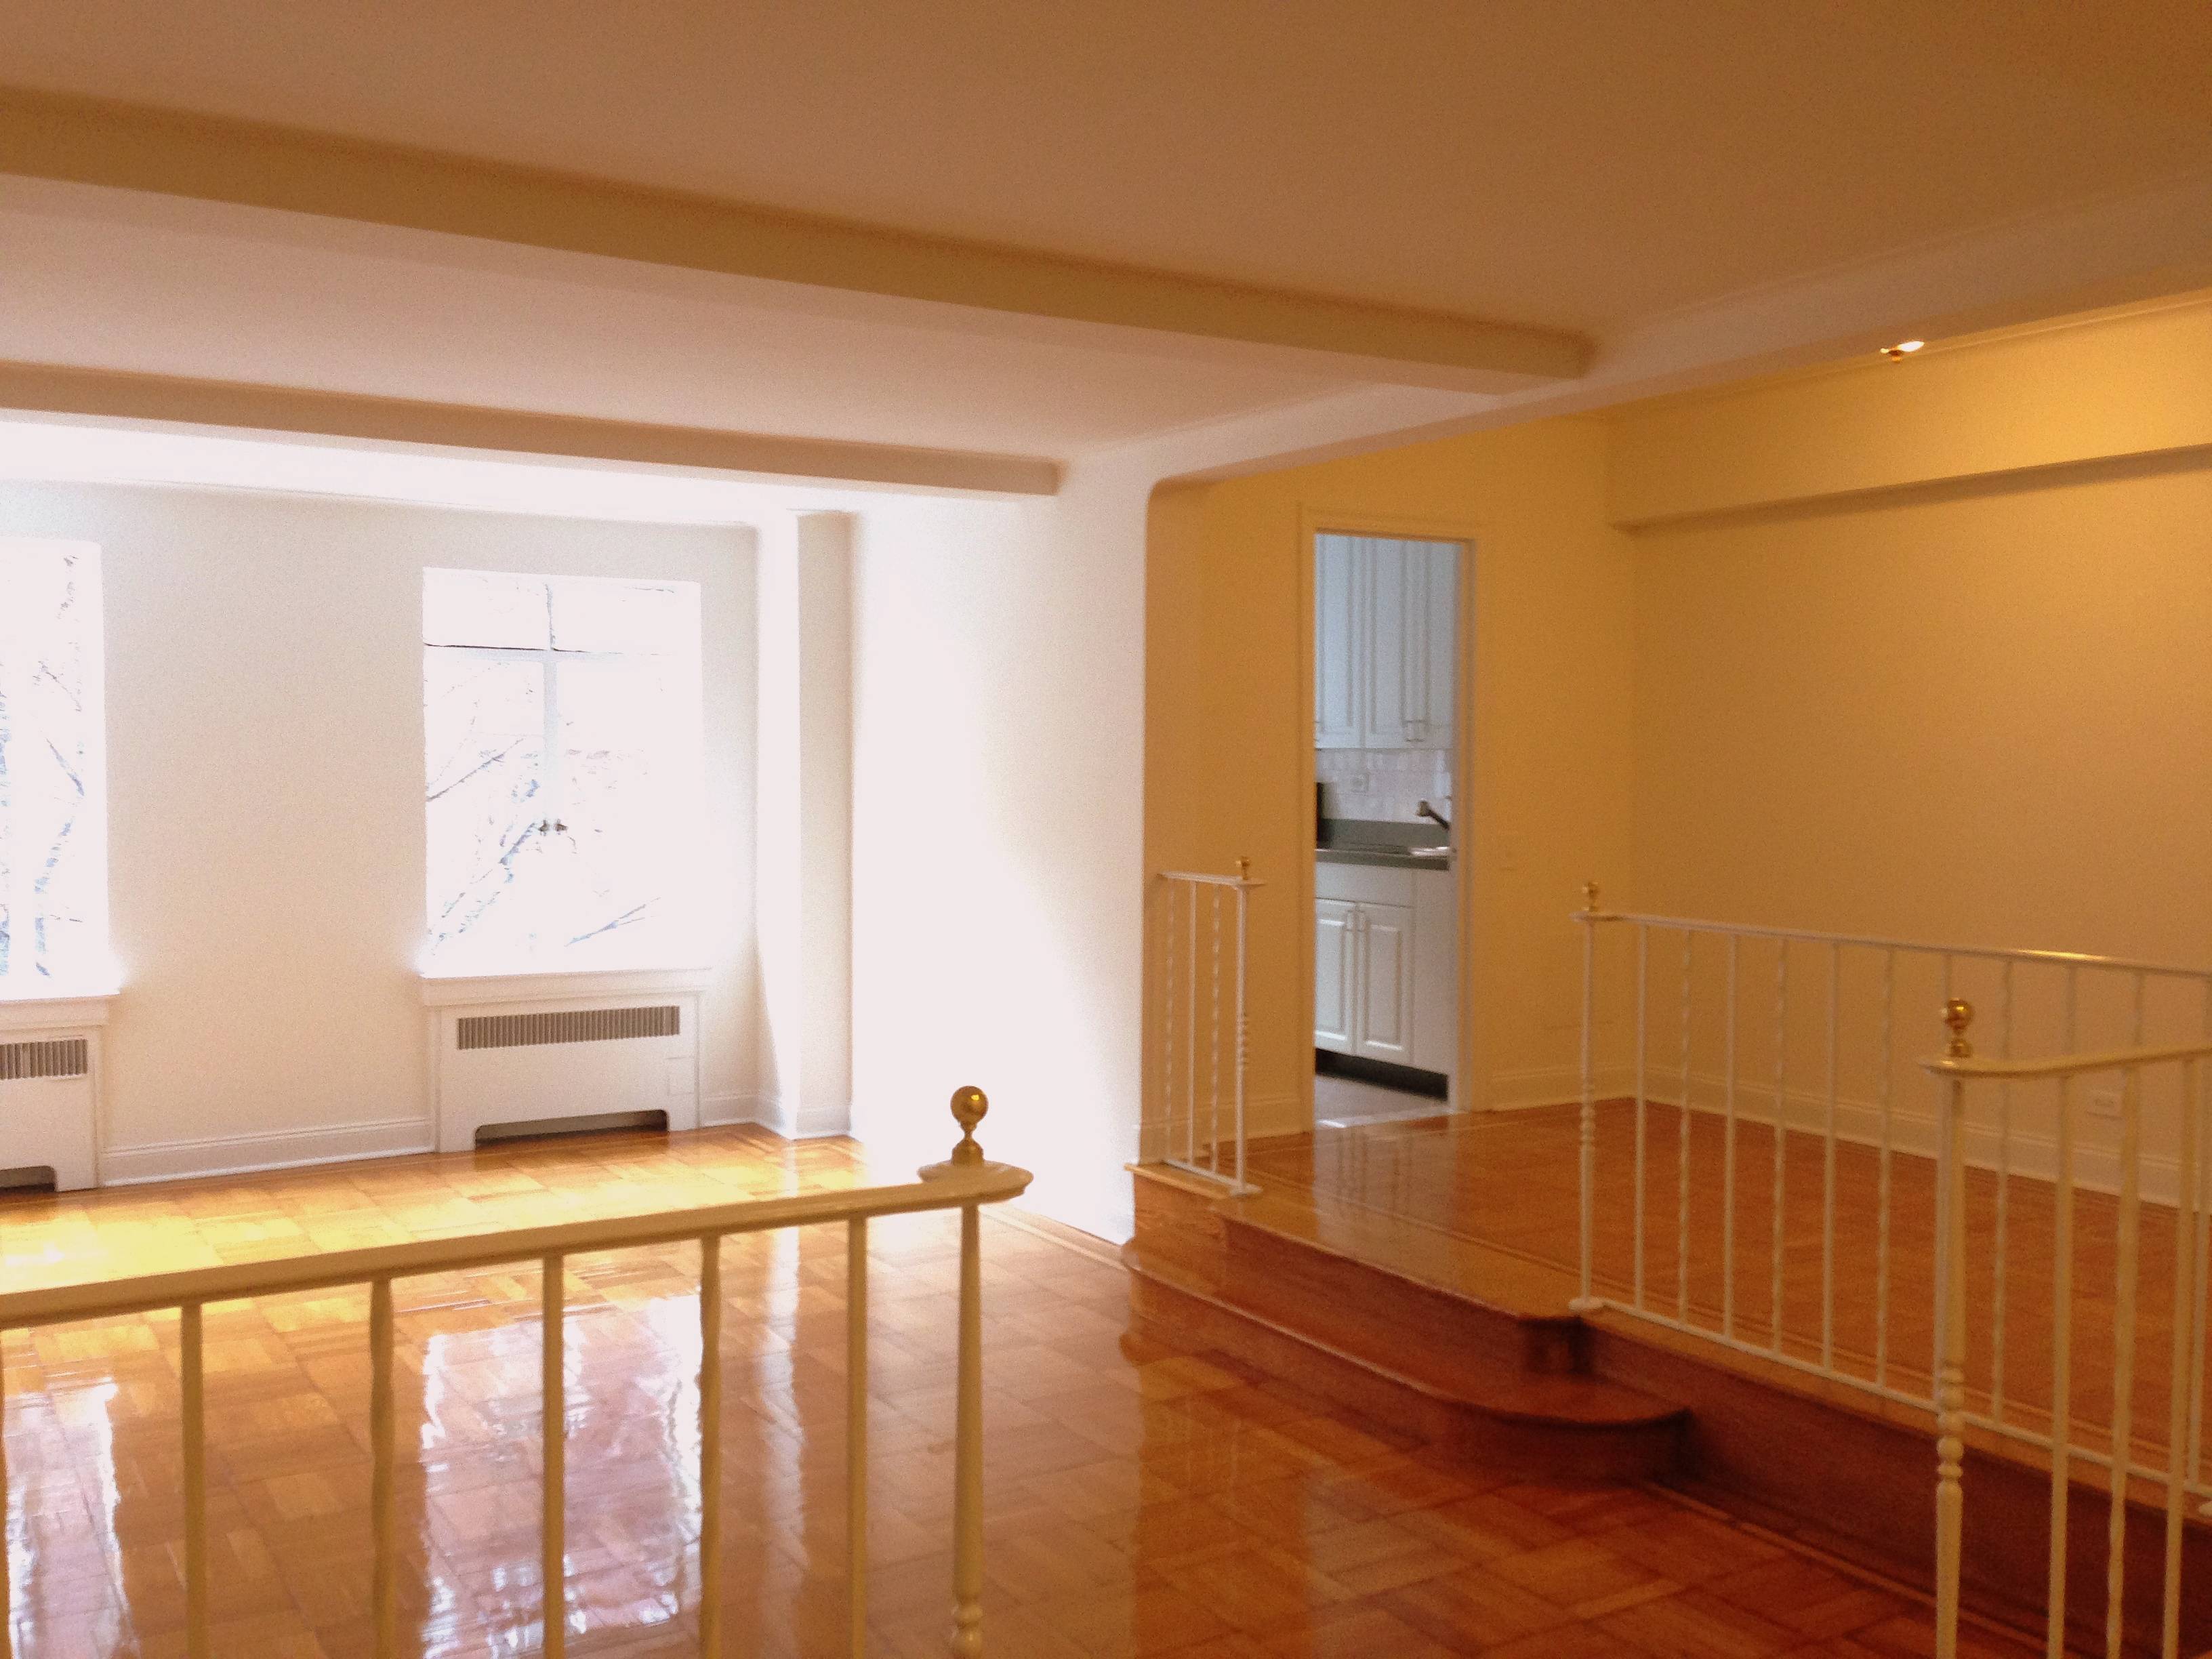 SPRAWLING UES ONE BEDROOM OFF MADISON AVE! LUXURIOUS PRE-WAR GEM!